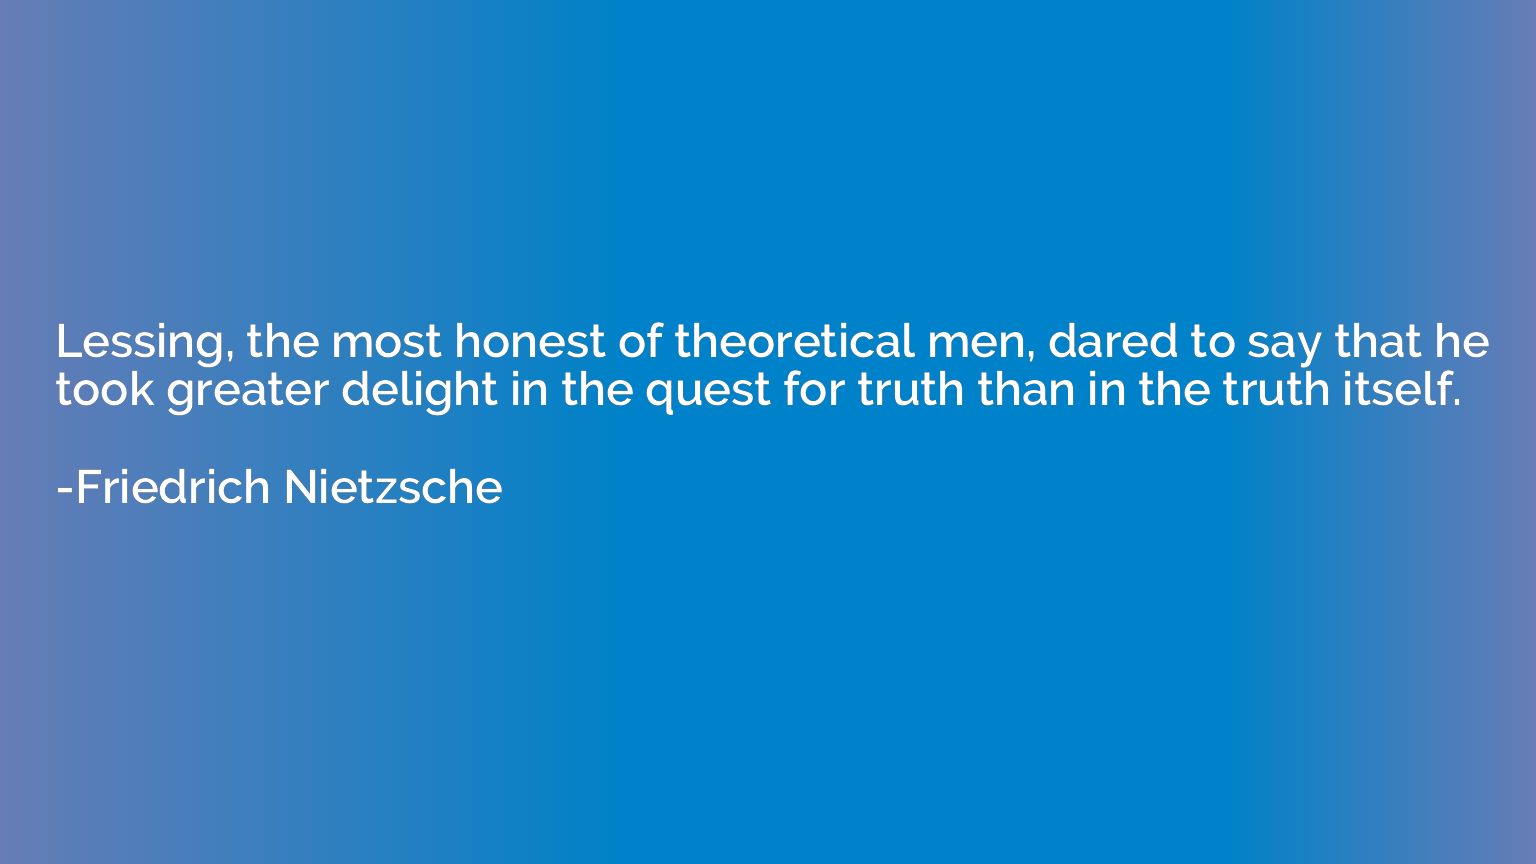 Lessing, the most honest of theoretical men, dared to say th